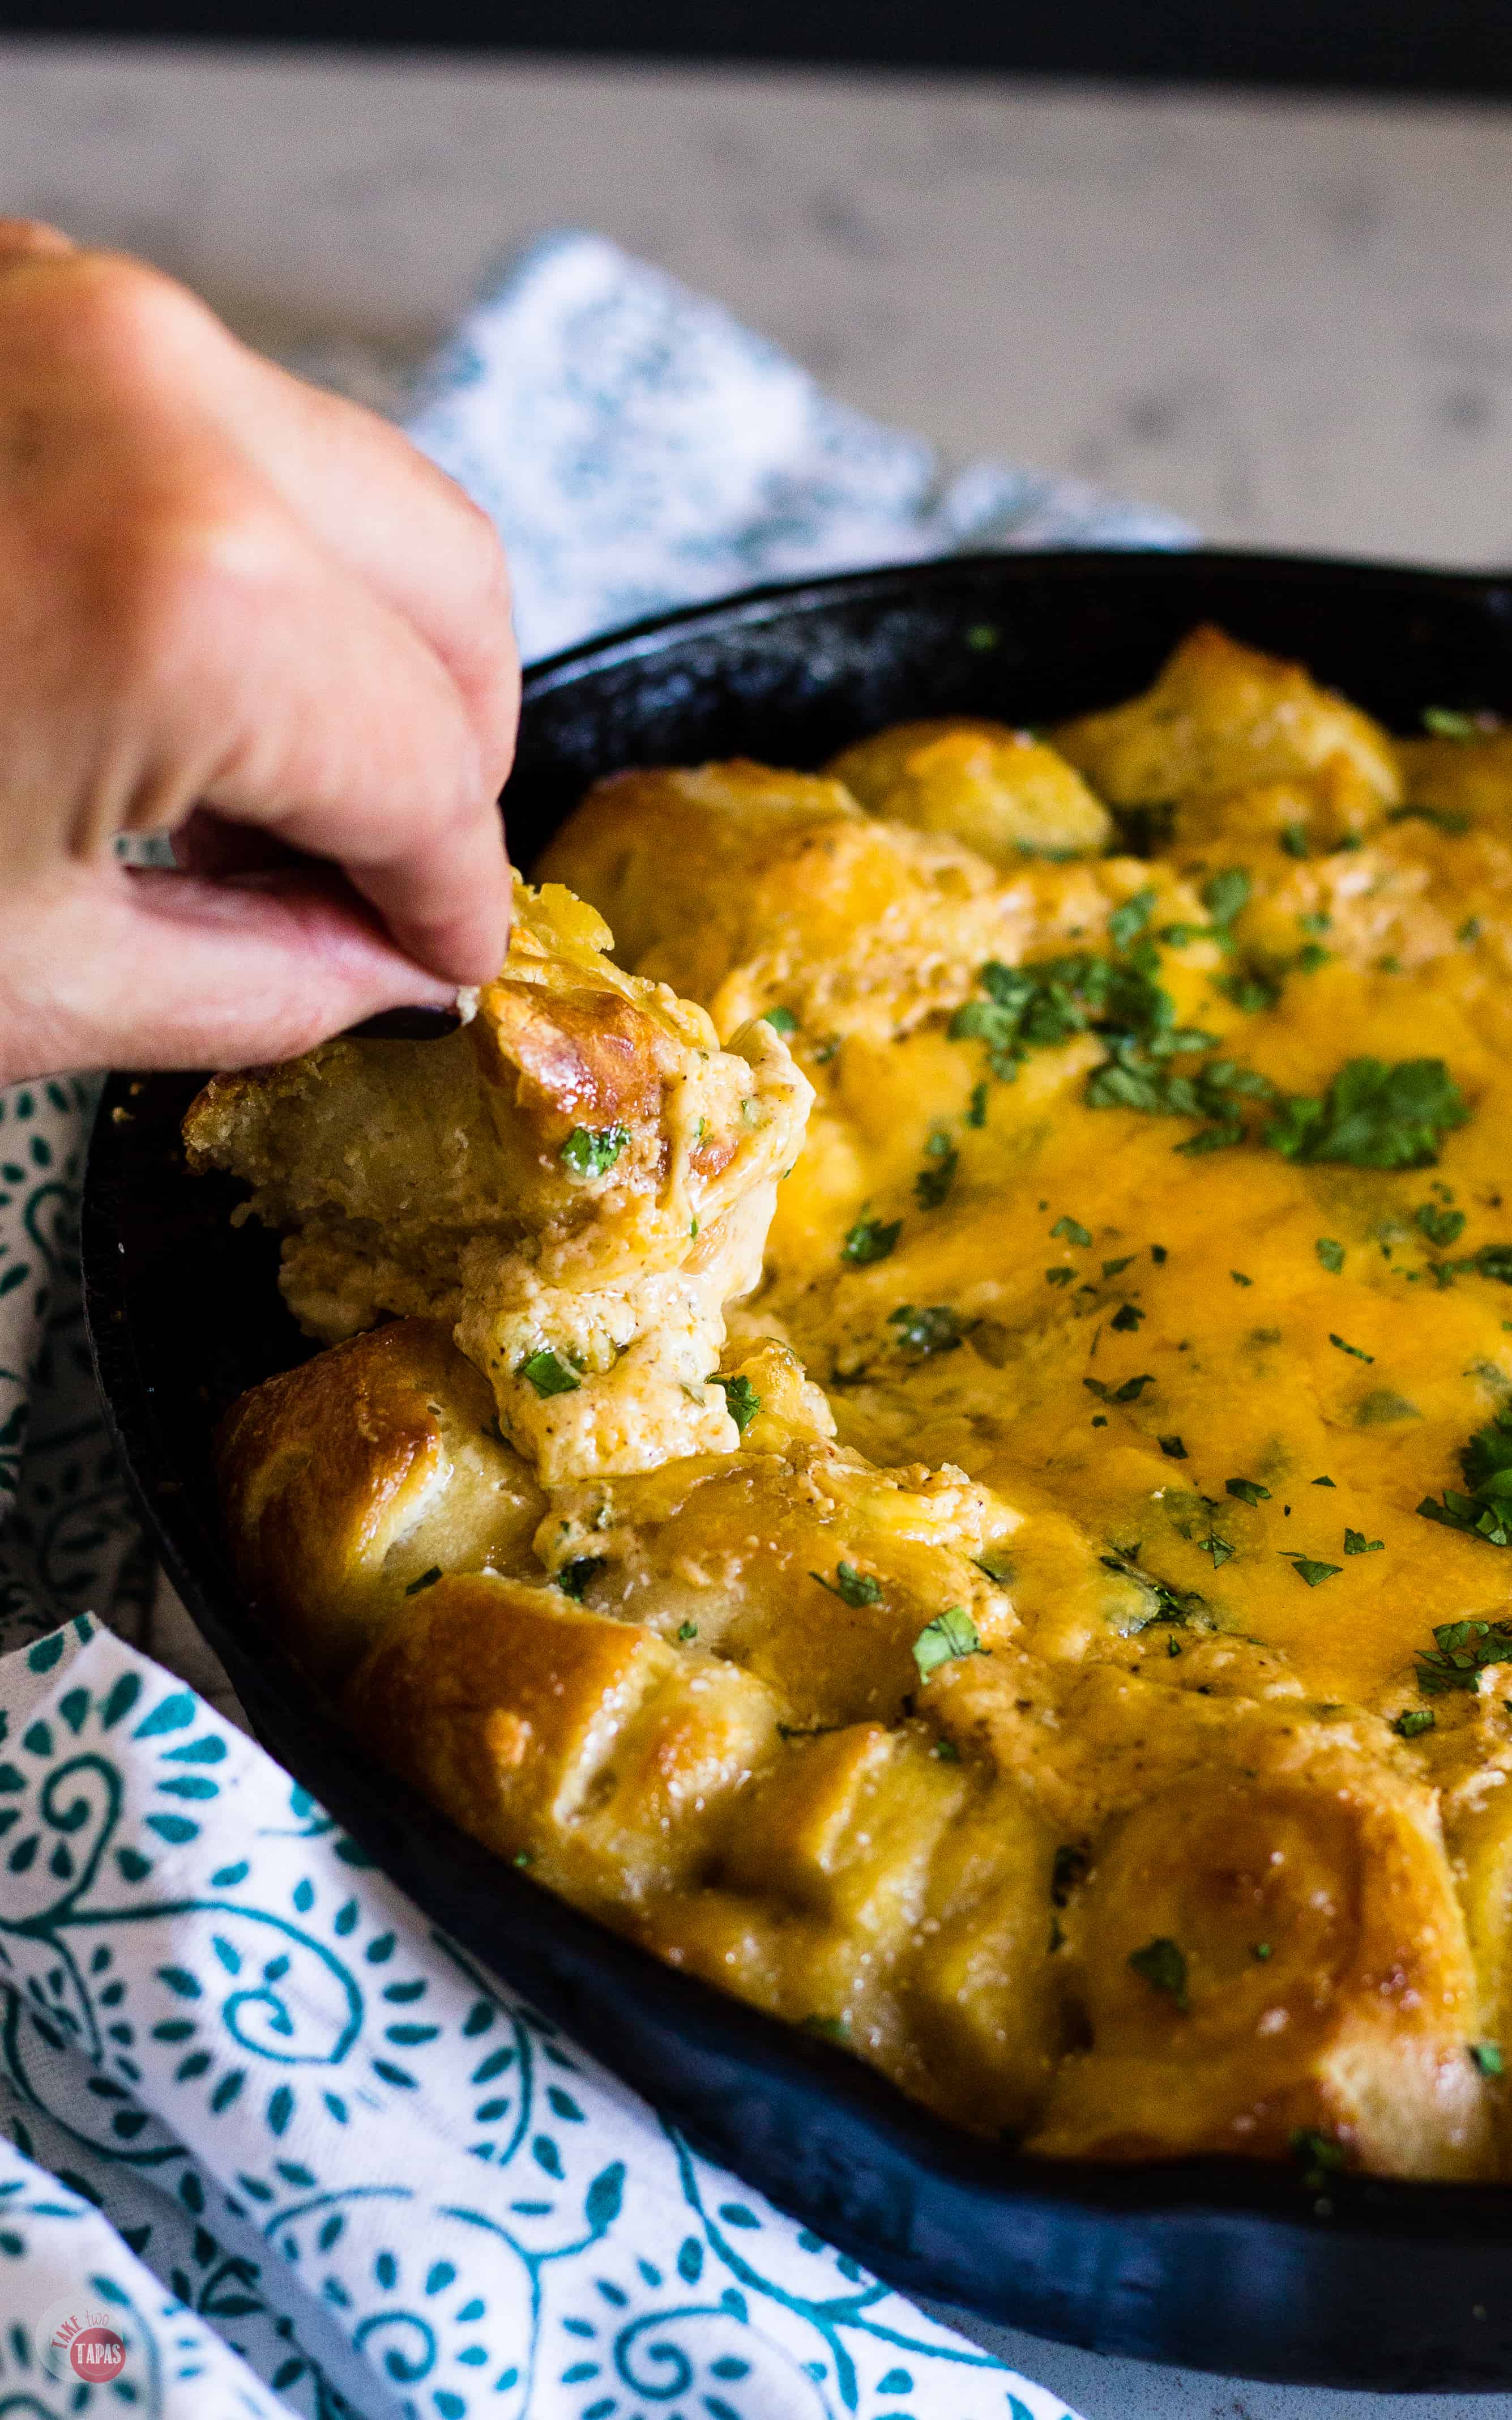 Easy to make Mexican Beer Cheese Skillet Dip with Shortcut Soft Pretzels | Take Two Tapas | #BeerCheese #SkilletDip #MexicanDishes #OnePanDip #Baked #MexicanRecipes #SoftPretzels